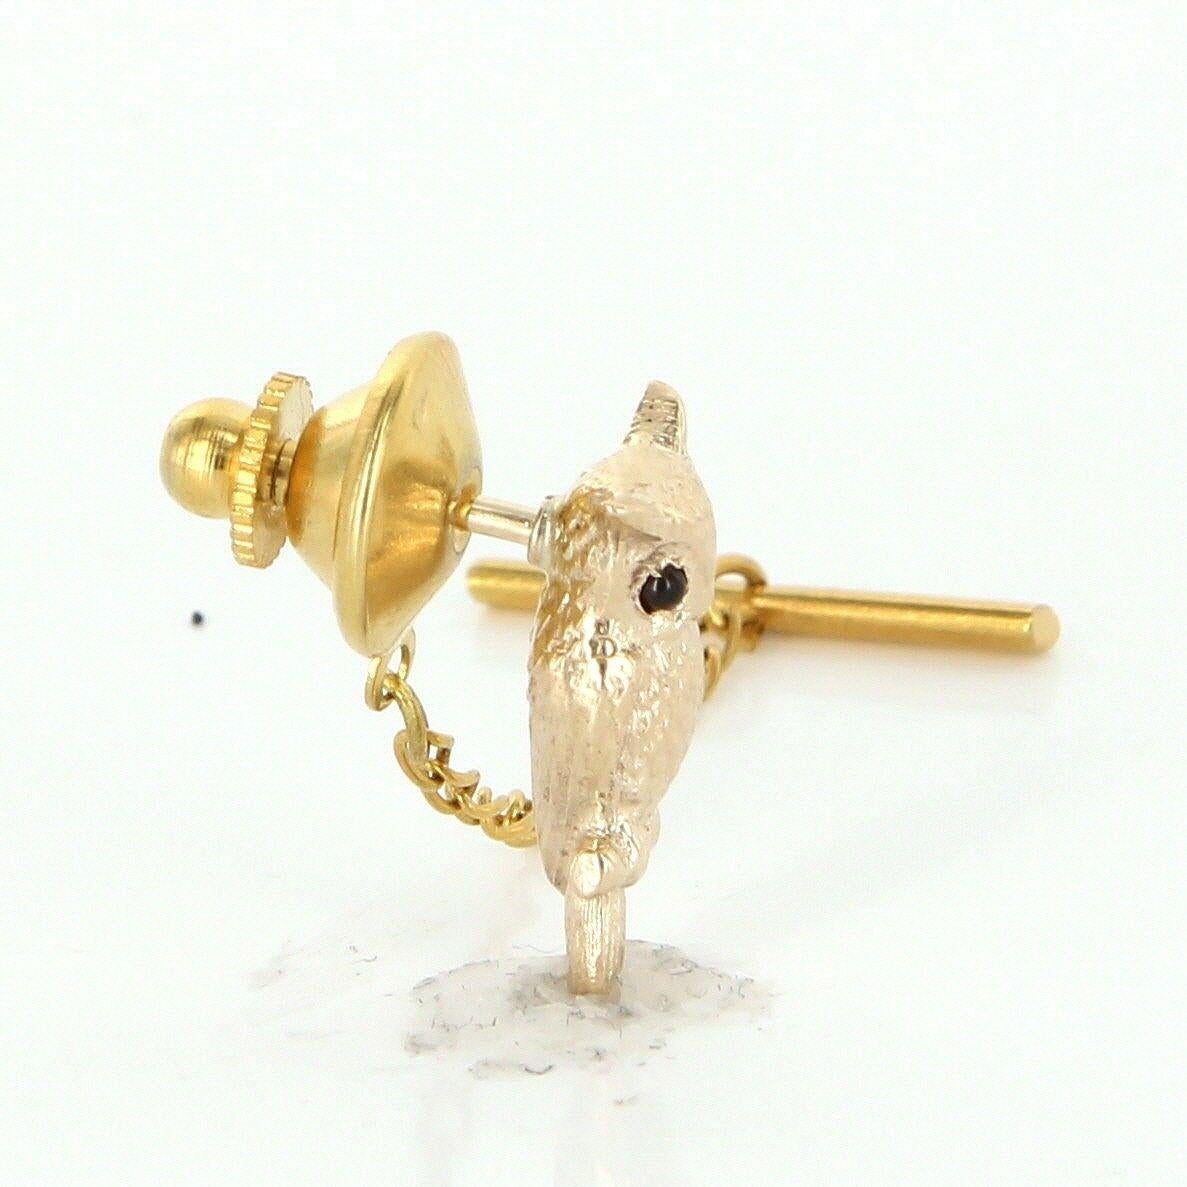 Offered for sale is a truly superb vintage tie tac pin (circa 1950s to 1960s), crafted beautifully in 14 karat yellow gold. 

A finely detailed owl bird is finished with an estimated .05 carat cabochon cut garnets that are set as eyes. 

Vintage tie